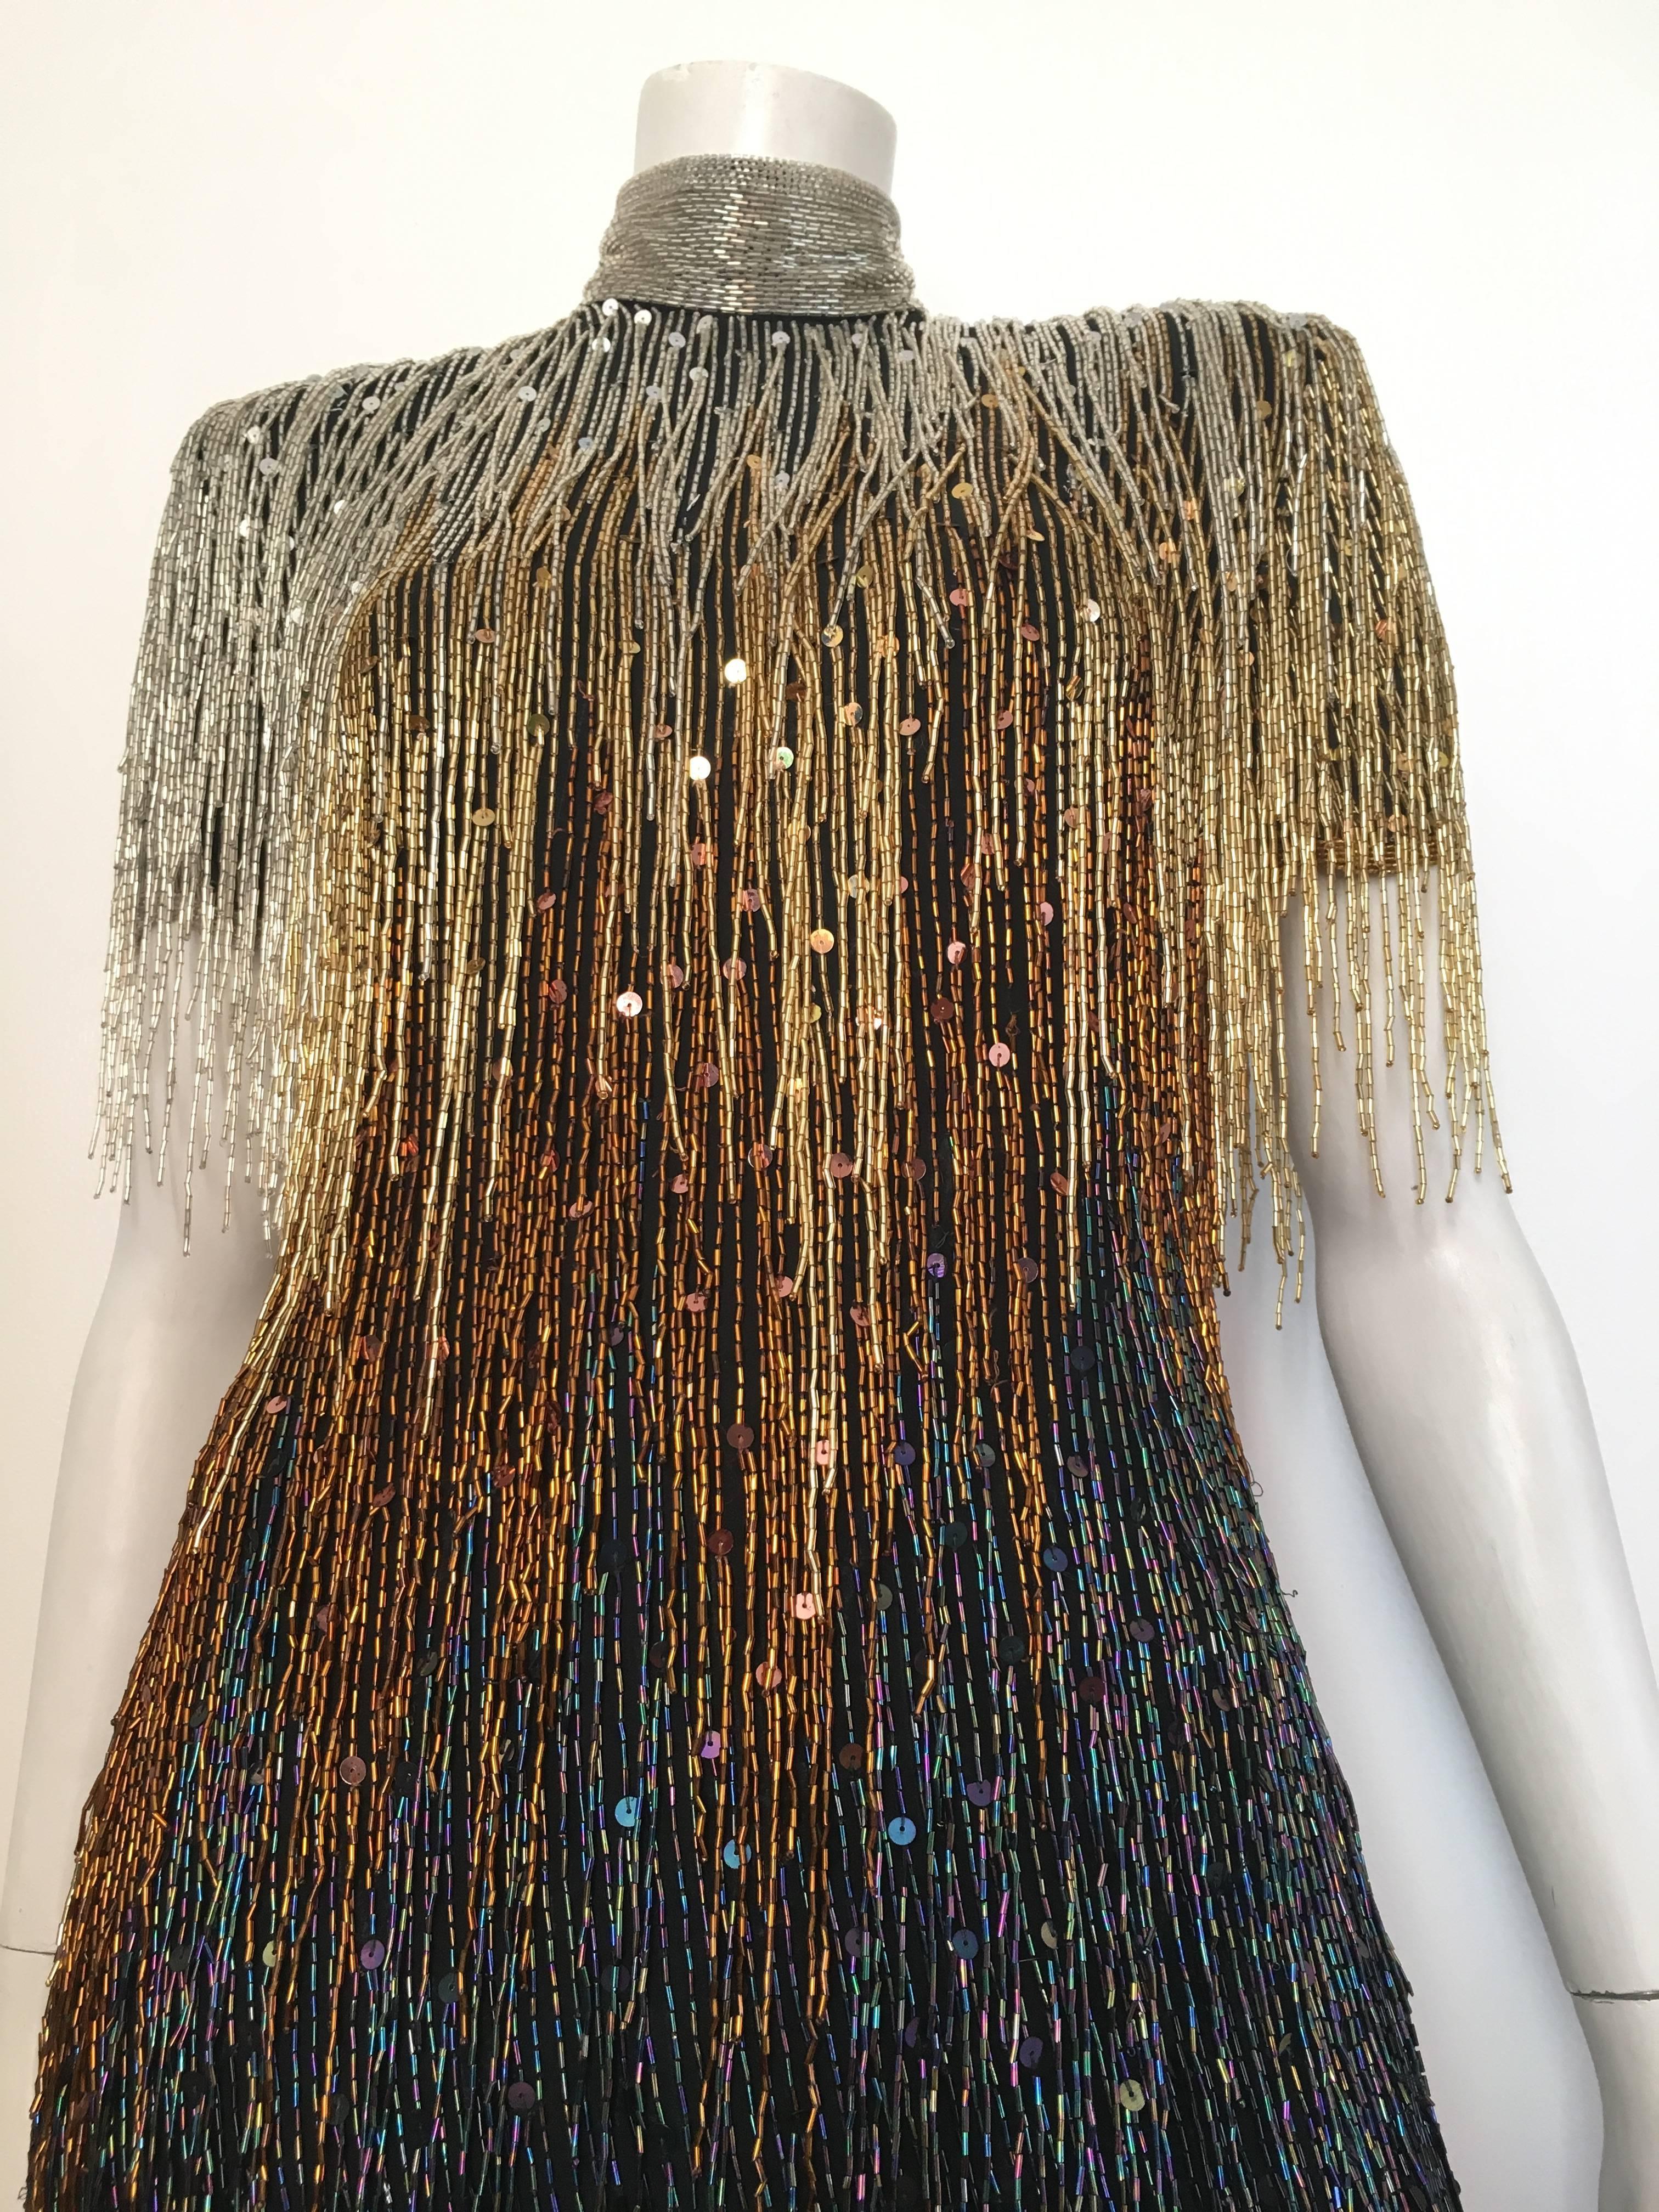 Naeem Khan Riazee for Neiman Marcus is a gorgeous Great Gatsby Embellished Flapper fringed beaded sequin evening cocktail dress that is a size 6. Ladies please grab your most trusted friend, Mr. Tape Measure, so you can properly measure your bust,